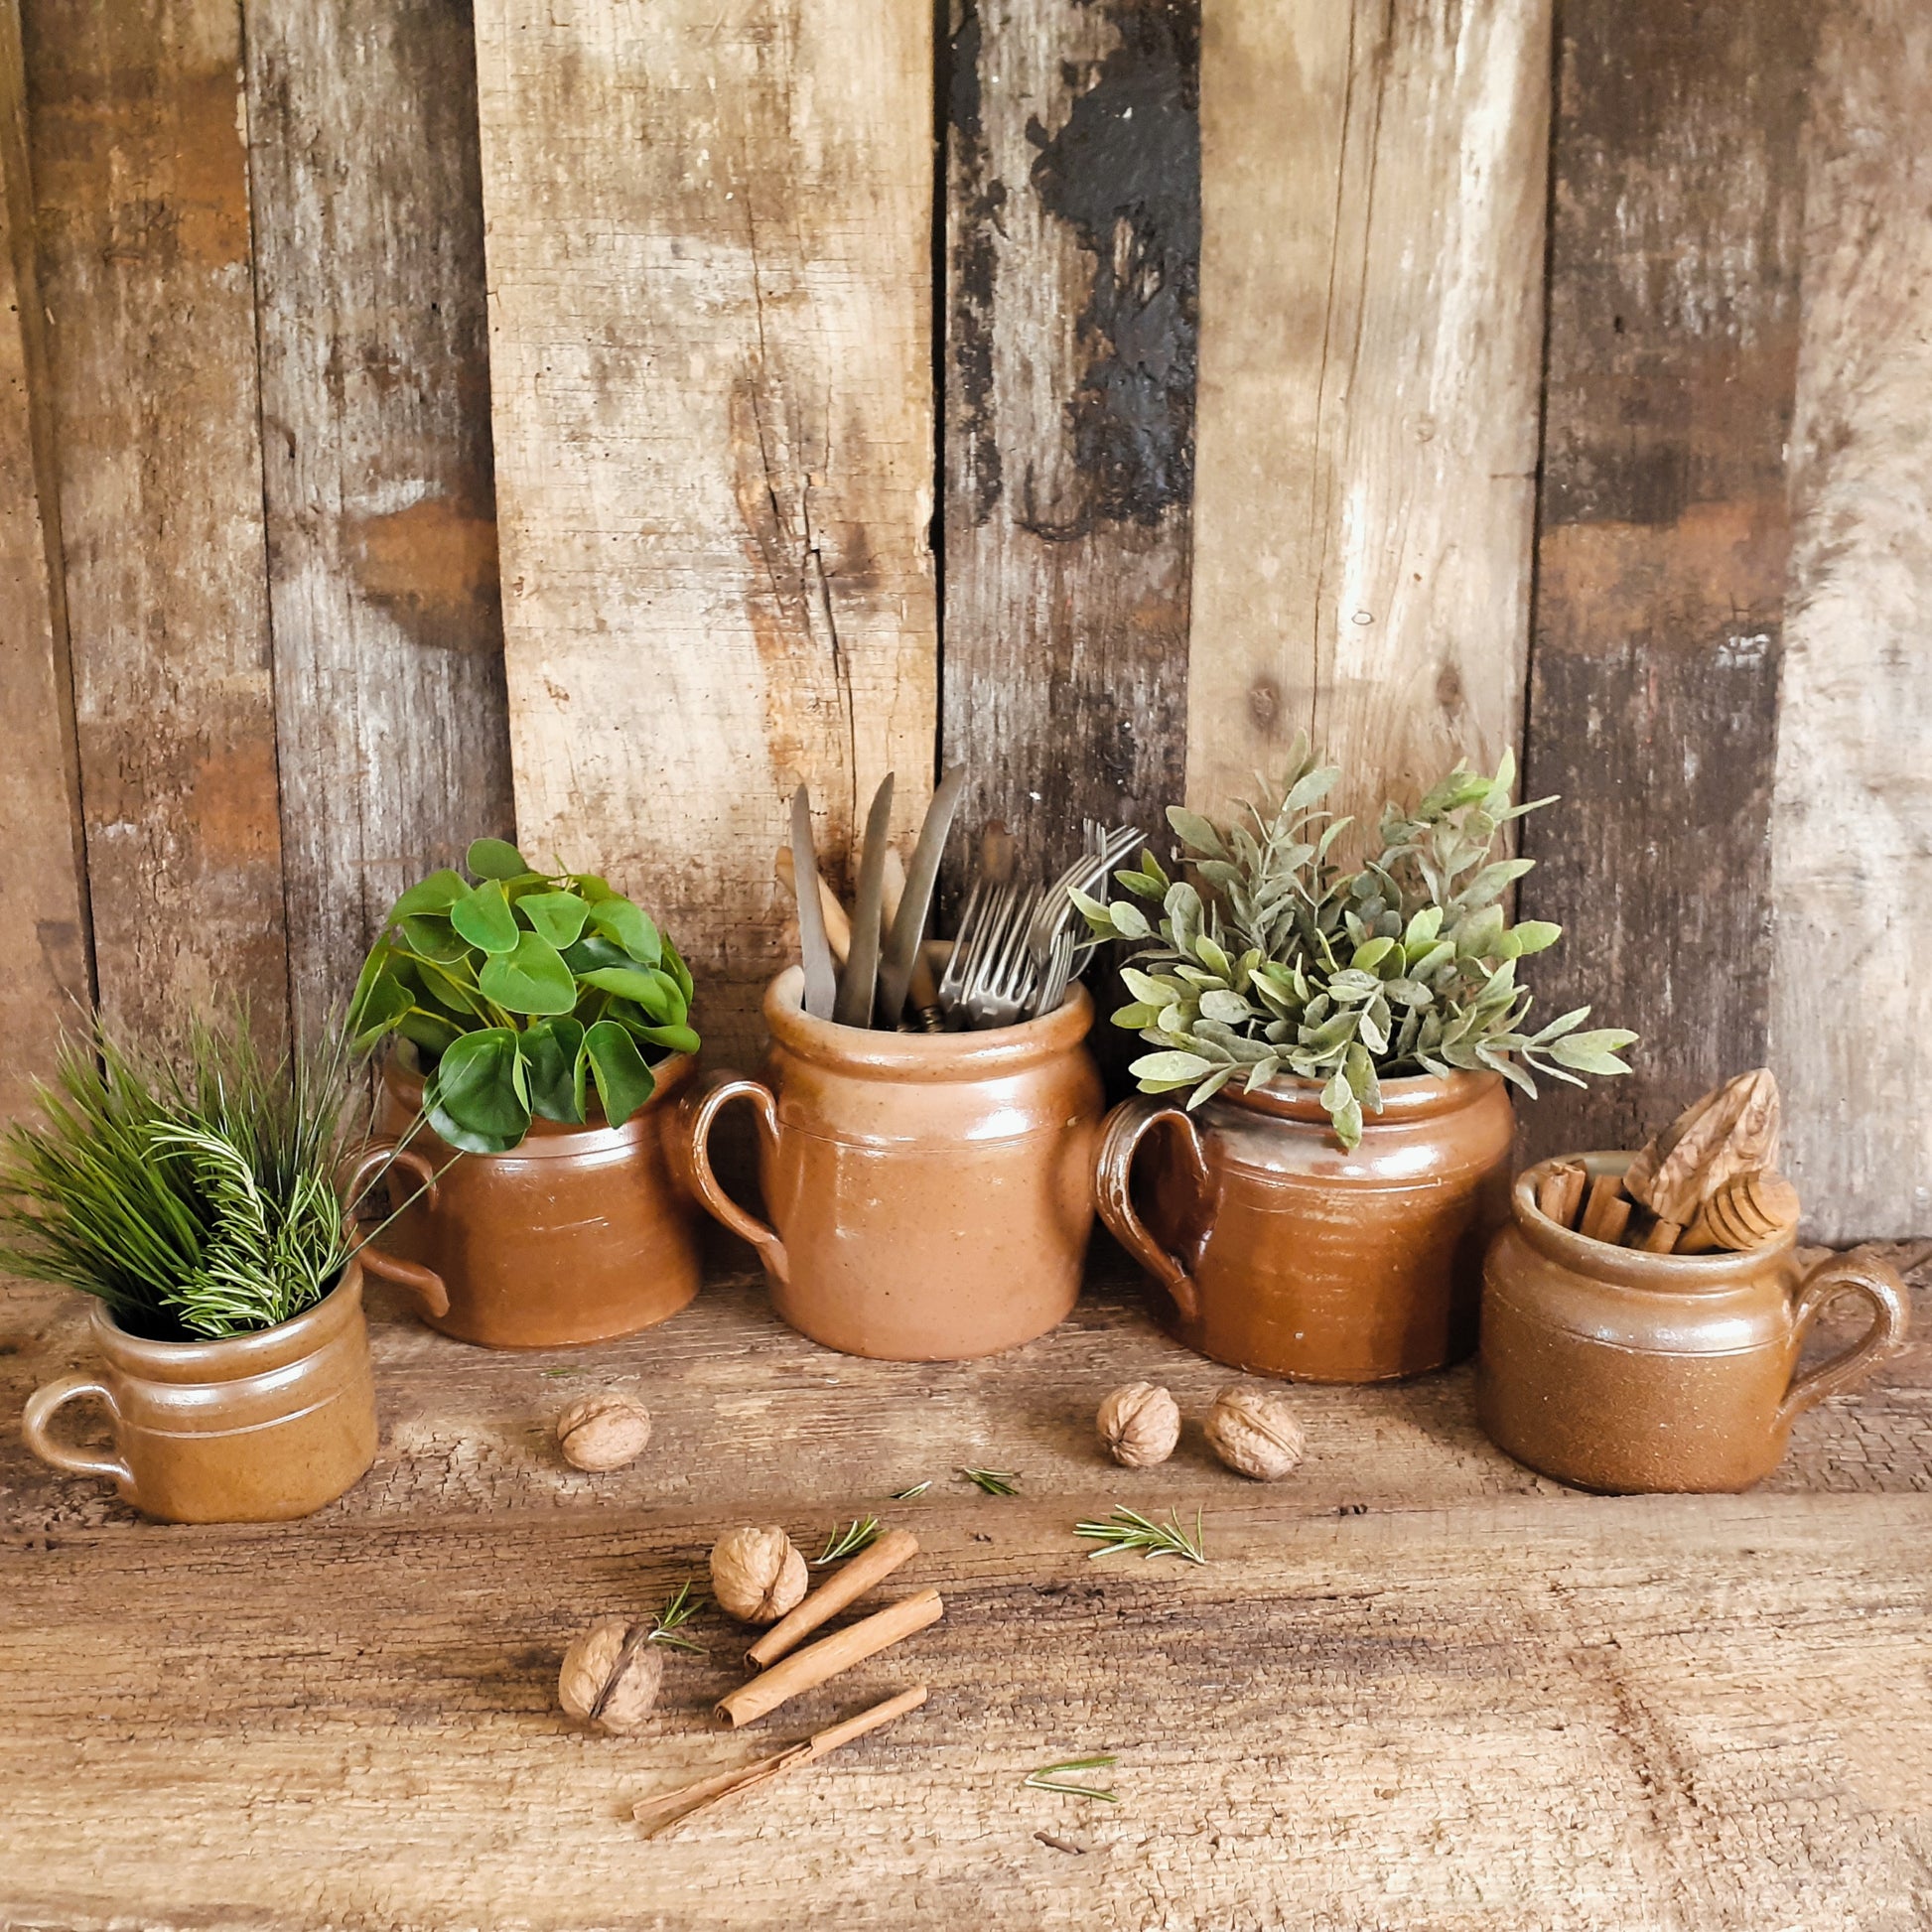 FIVE Antique Stoneware Confit Pots from Tiggy & Pip - Just €275! Shop now at Tiggy and Pip